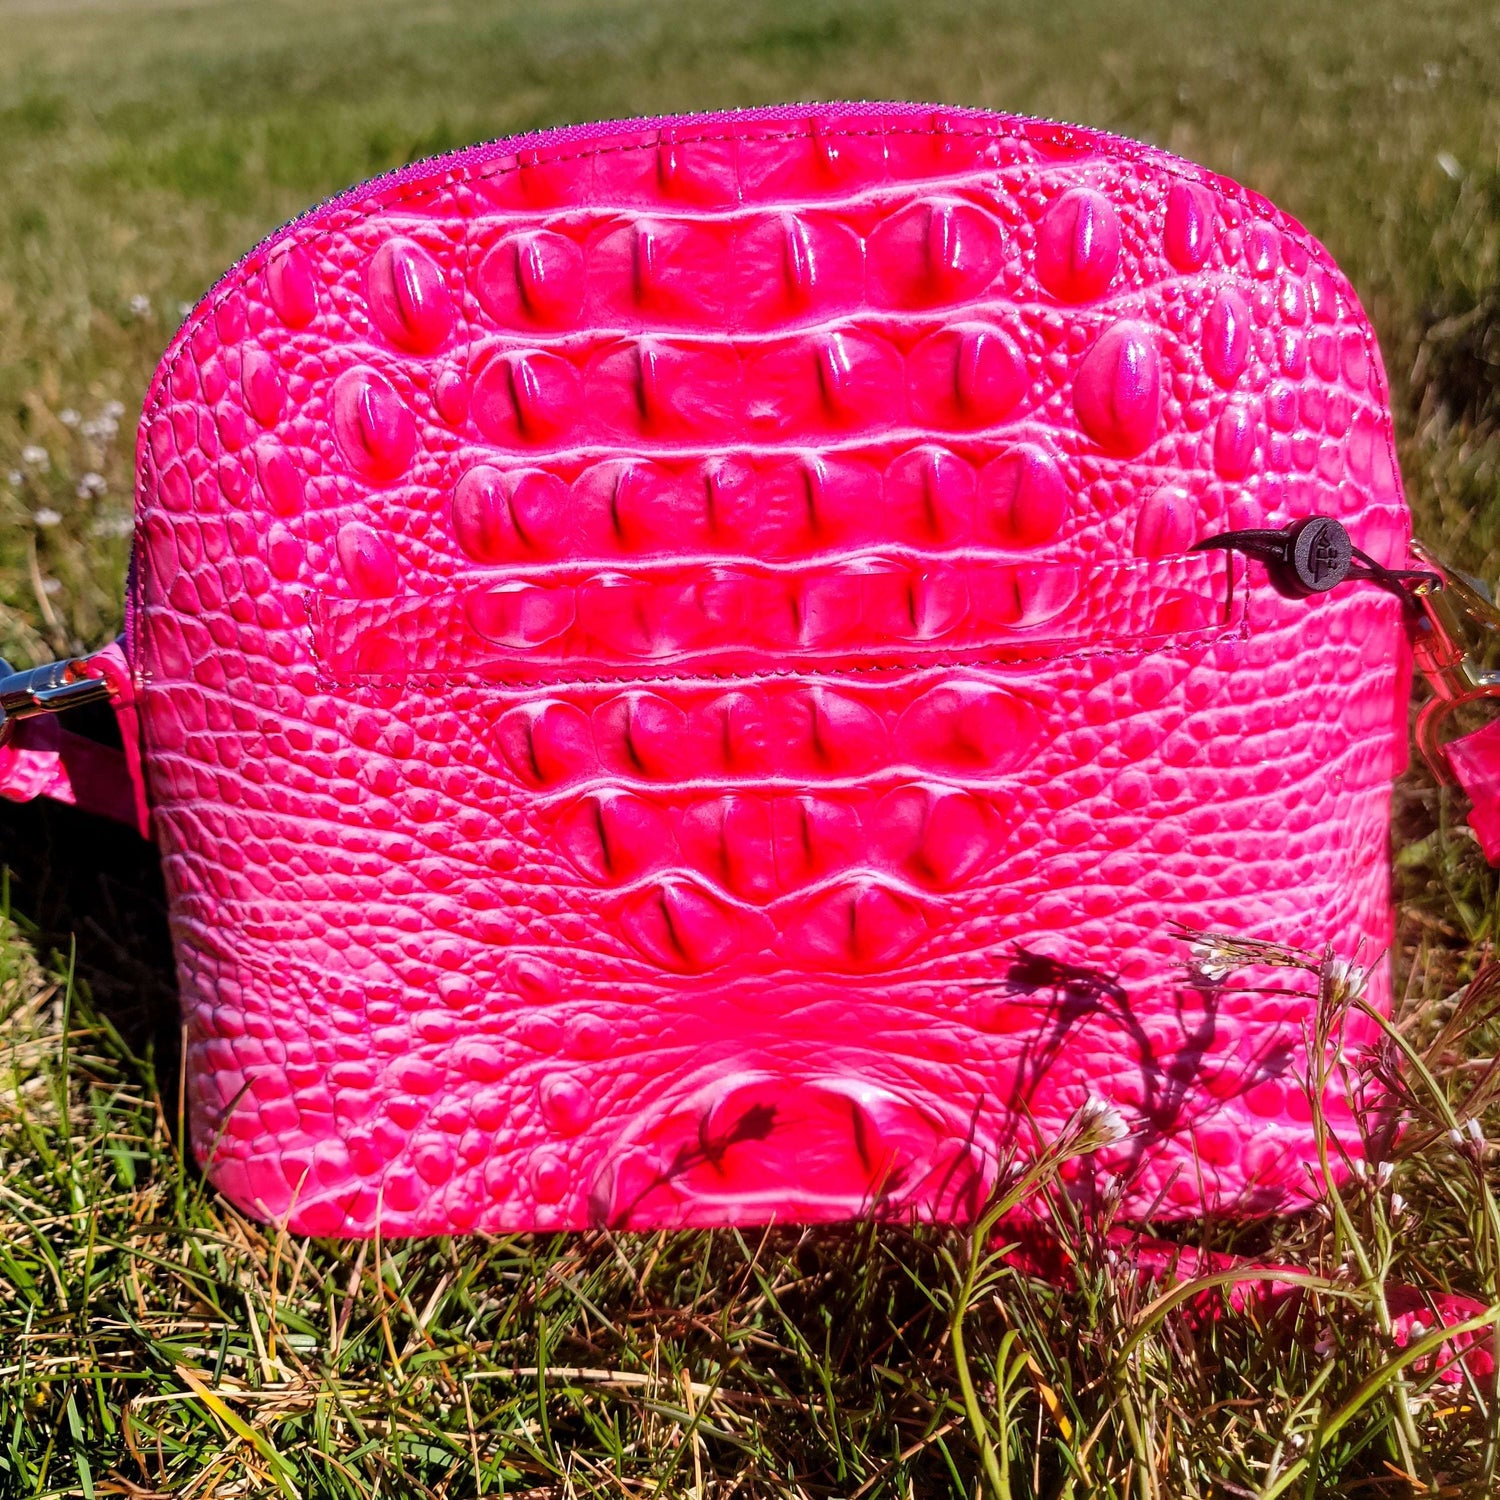 Brahmin Hot Pink Purse with gold hardware